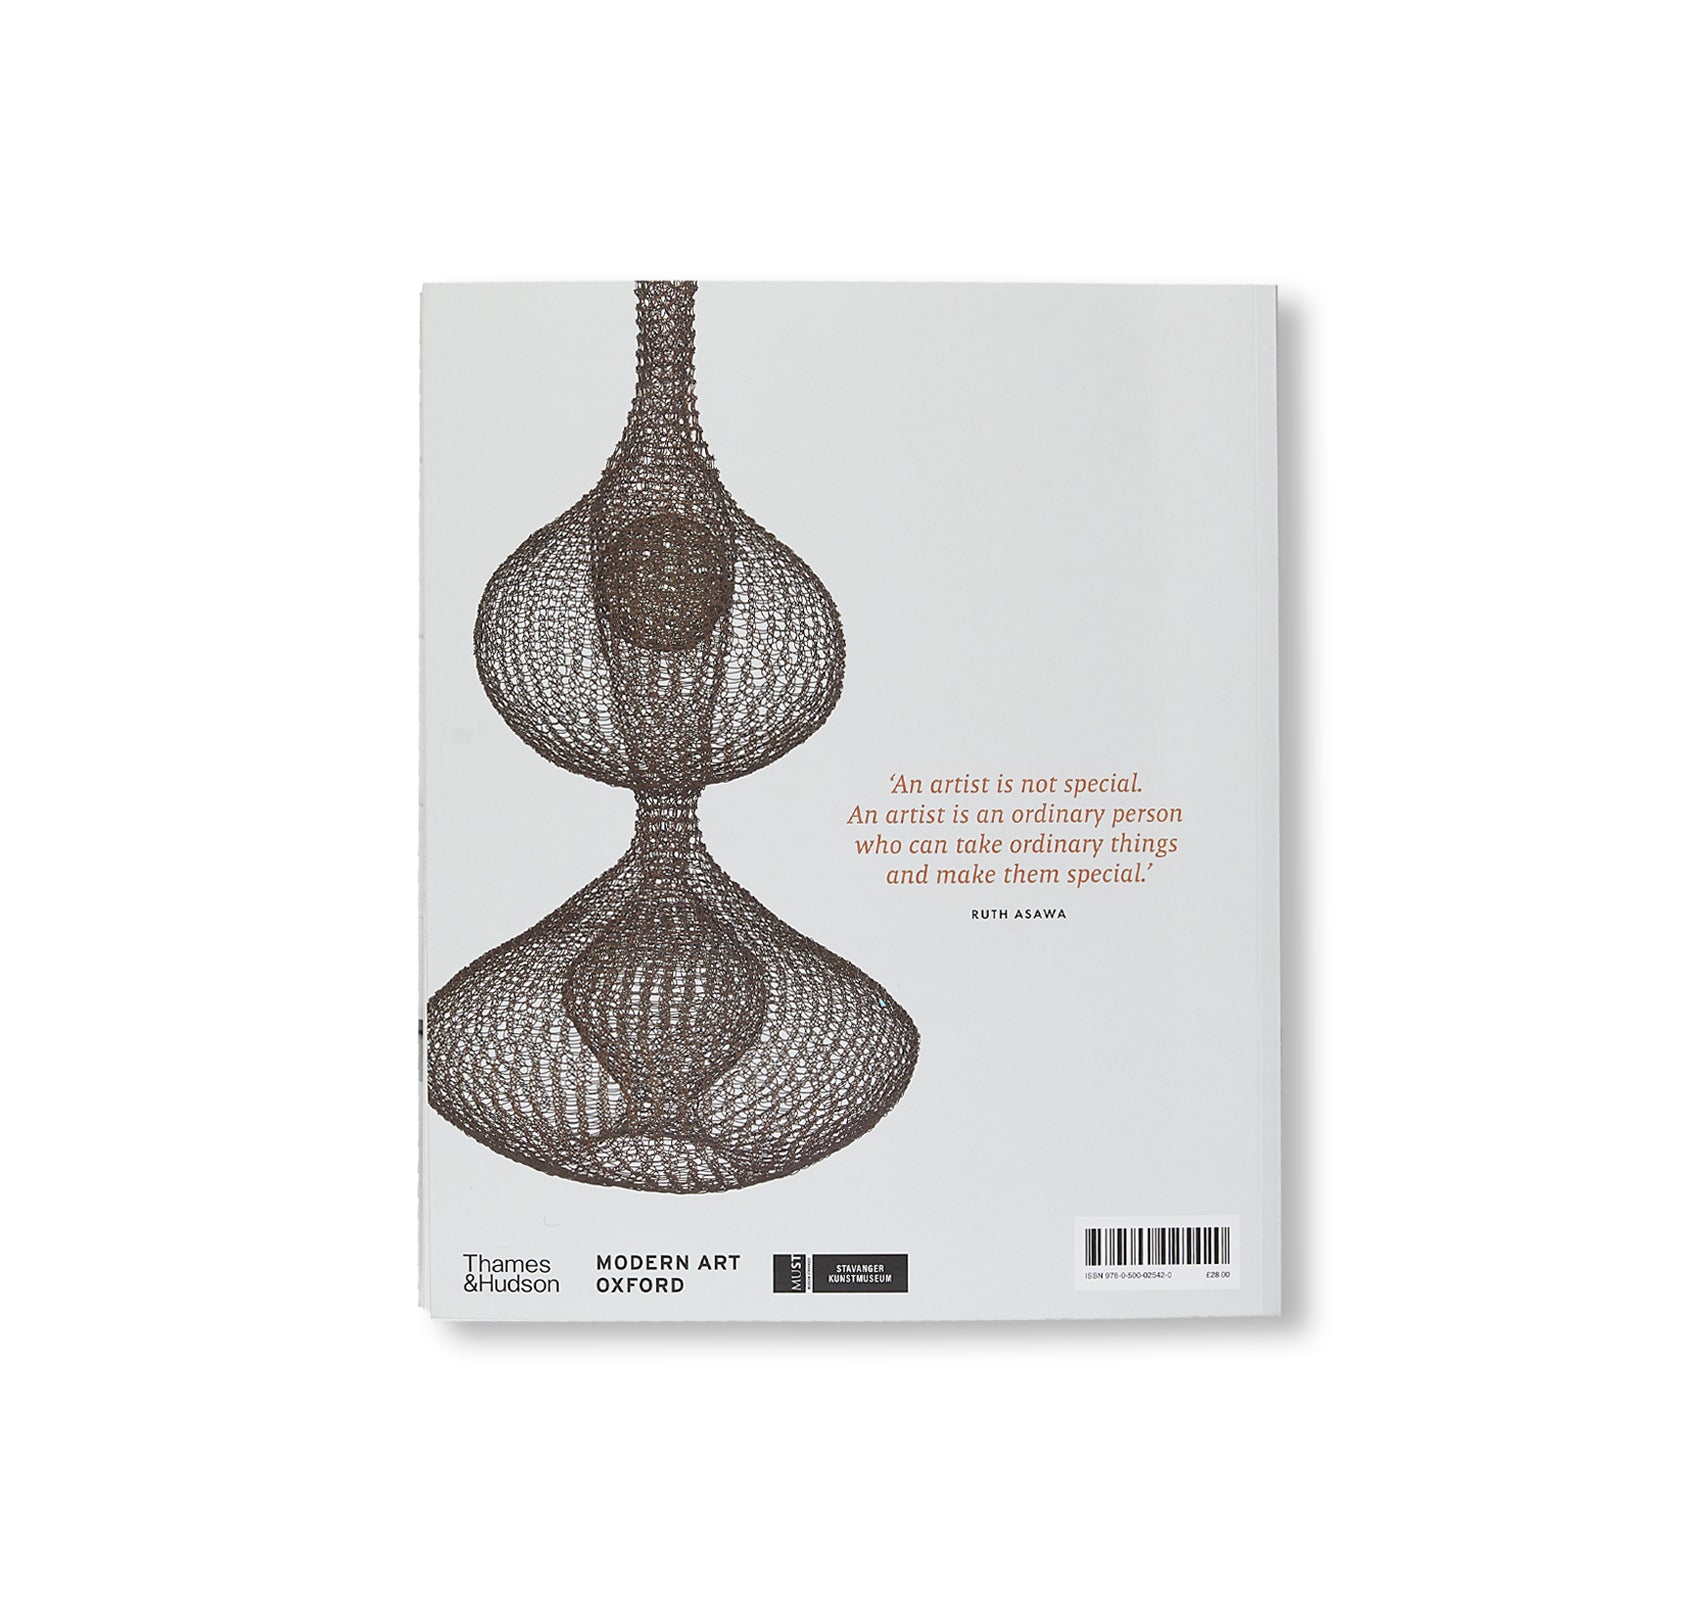 CITIZEN OF THE UNIVERSE by Ruth Asawa